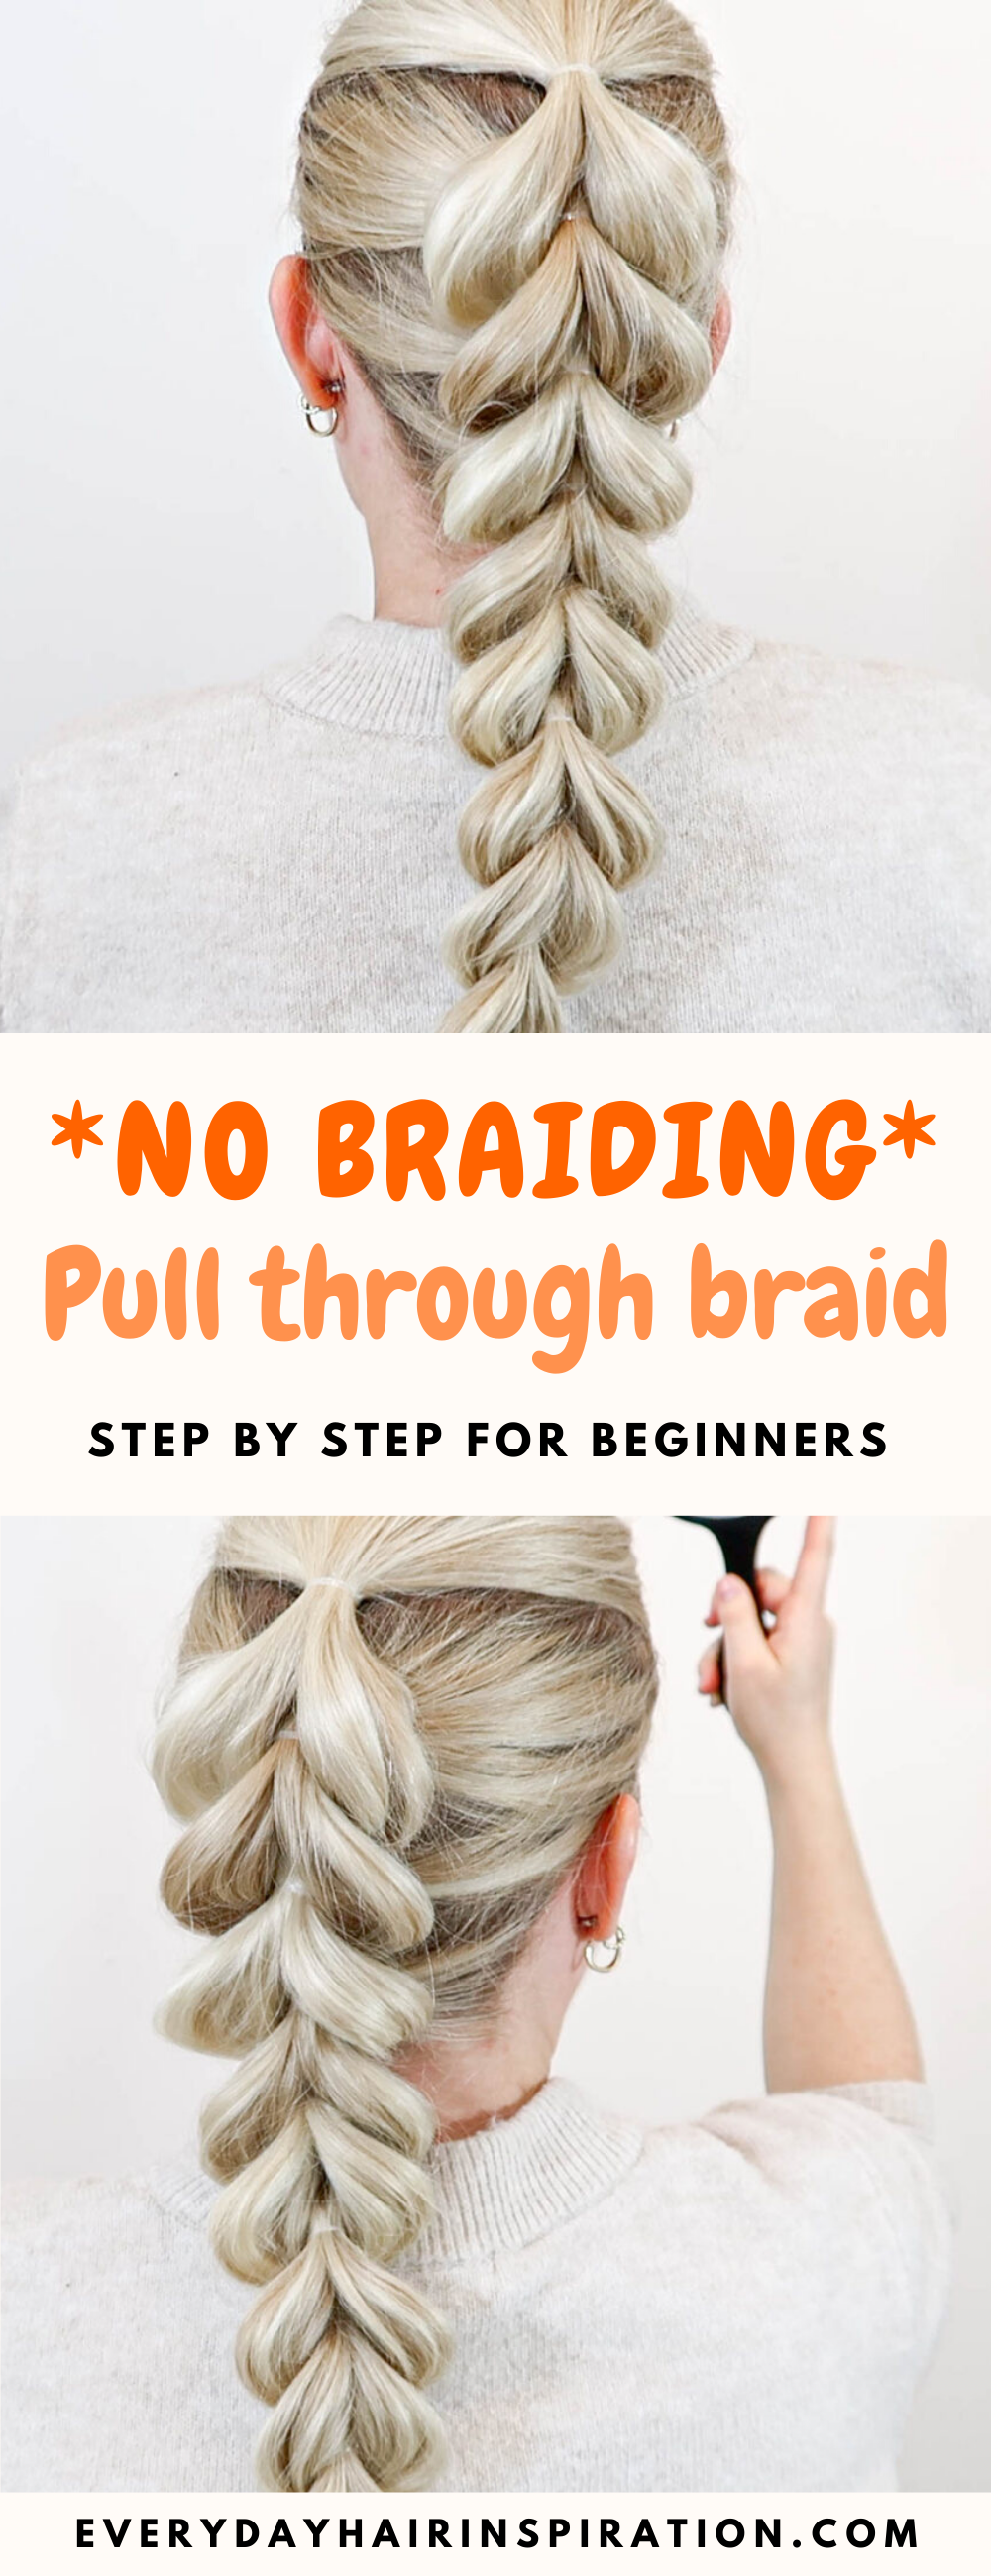 How To French Braid Step by Step For Beginners - Full Talk Through